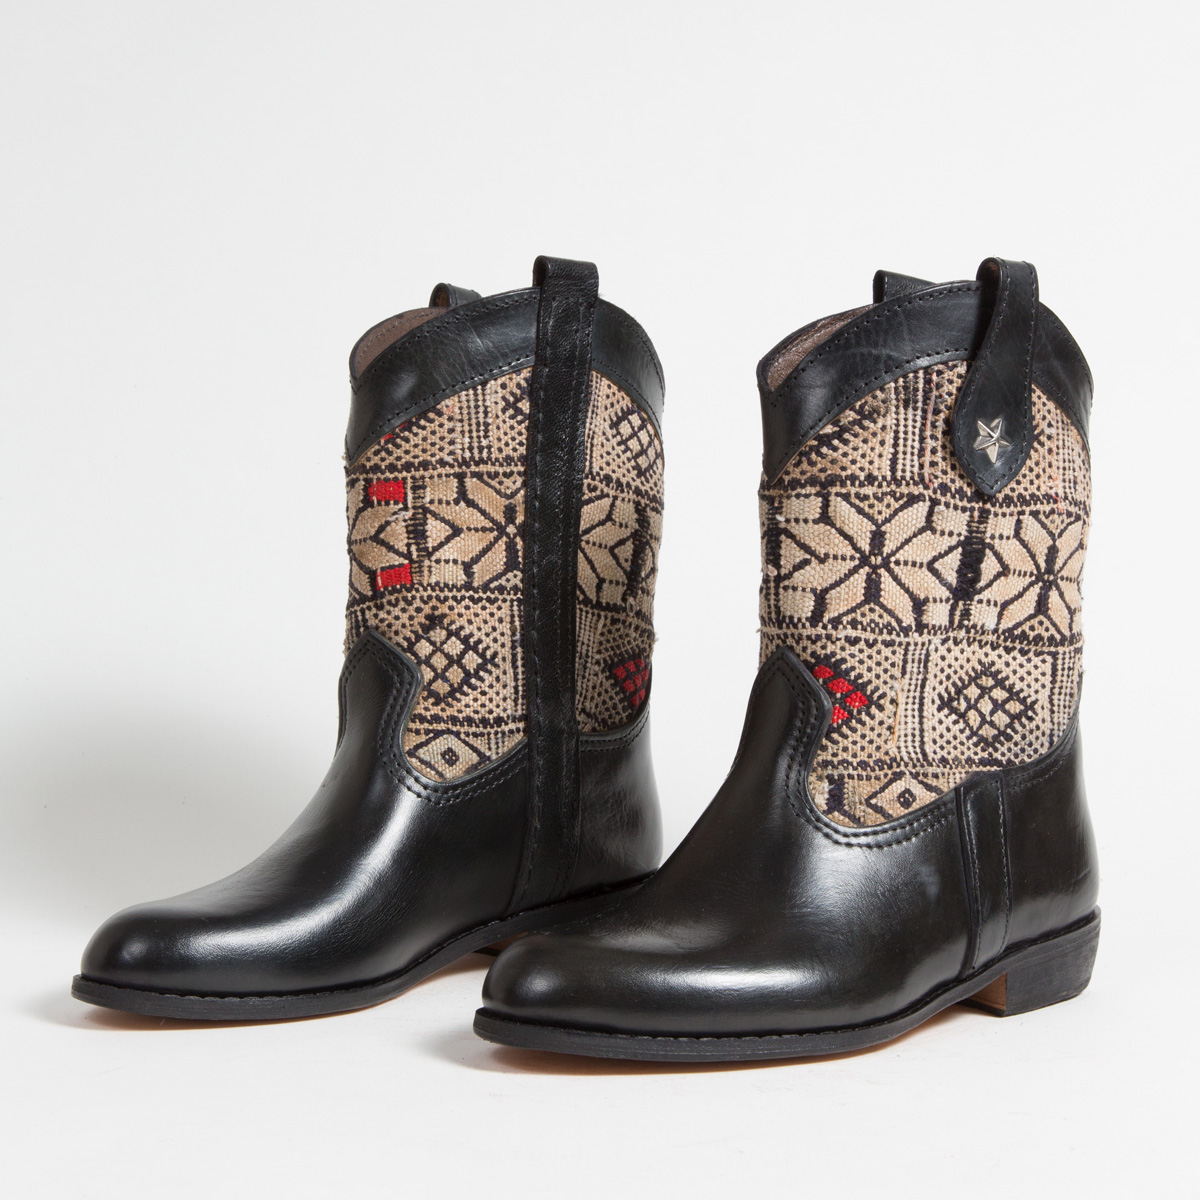 Bottines Kilim cuir mababouche artisanales (Réf. MN4-38)